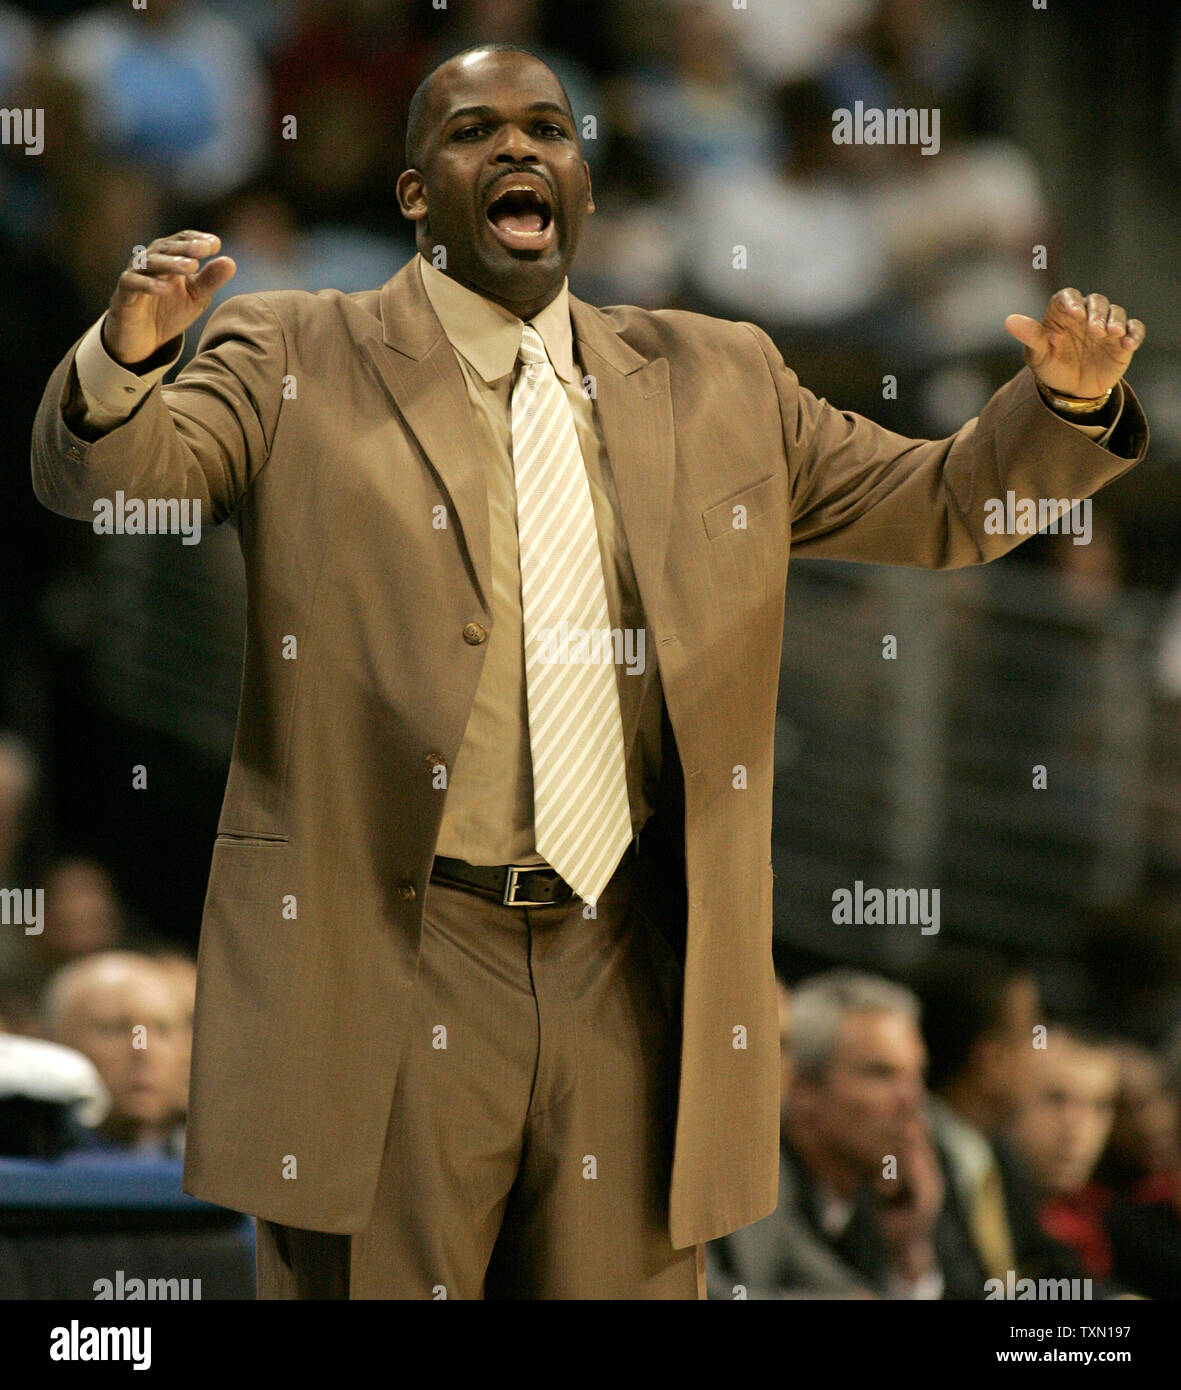 Portland Trail Blazers head coach Nate McMilllan reacts against the Denver Nuggets during the second half at the Pepsi Center in Denver on March 13, 2007.   Denver beat Portland 107-99.   (UPI Photo/Gary C. Caskey) Stock Photo